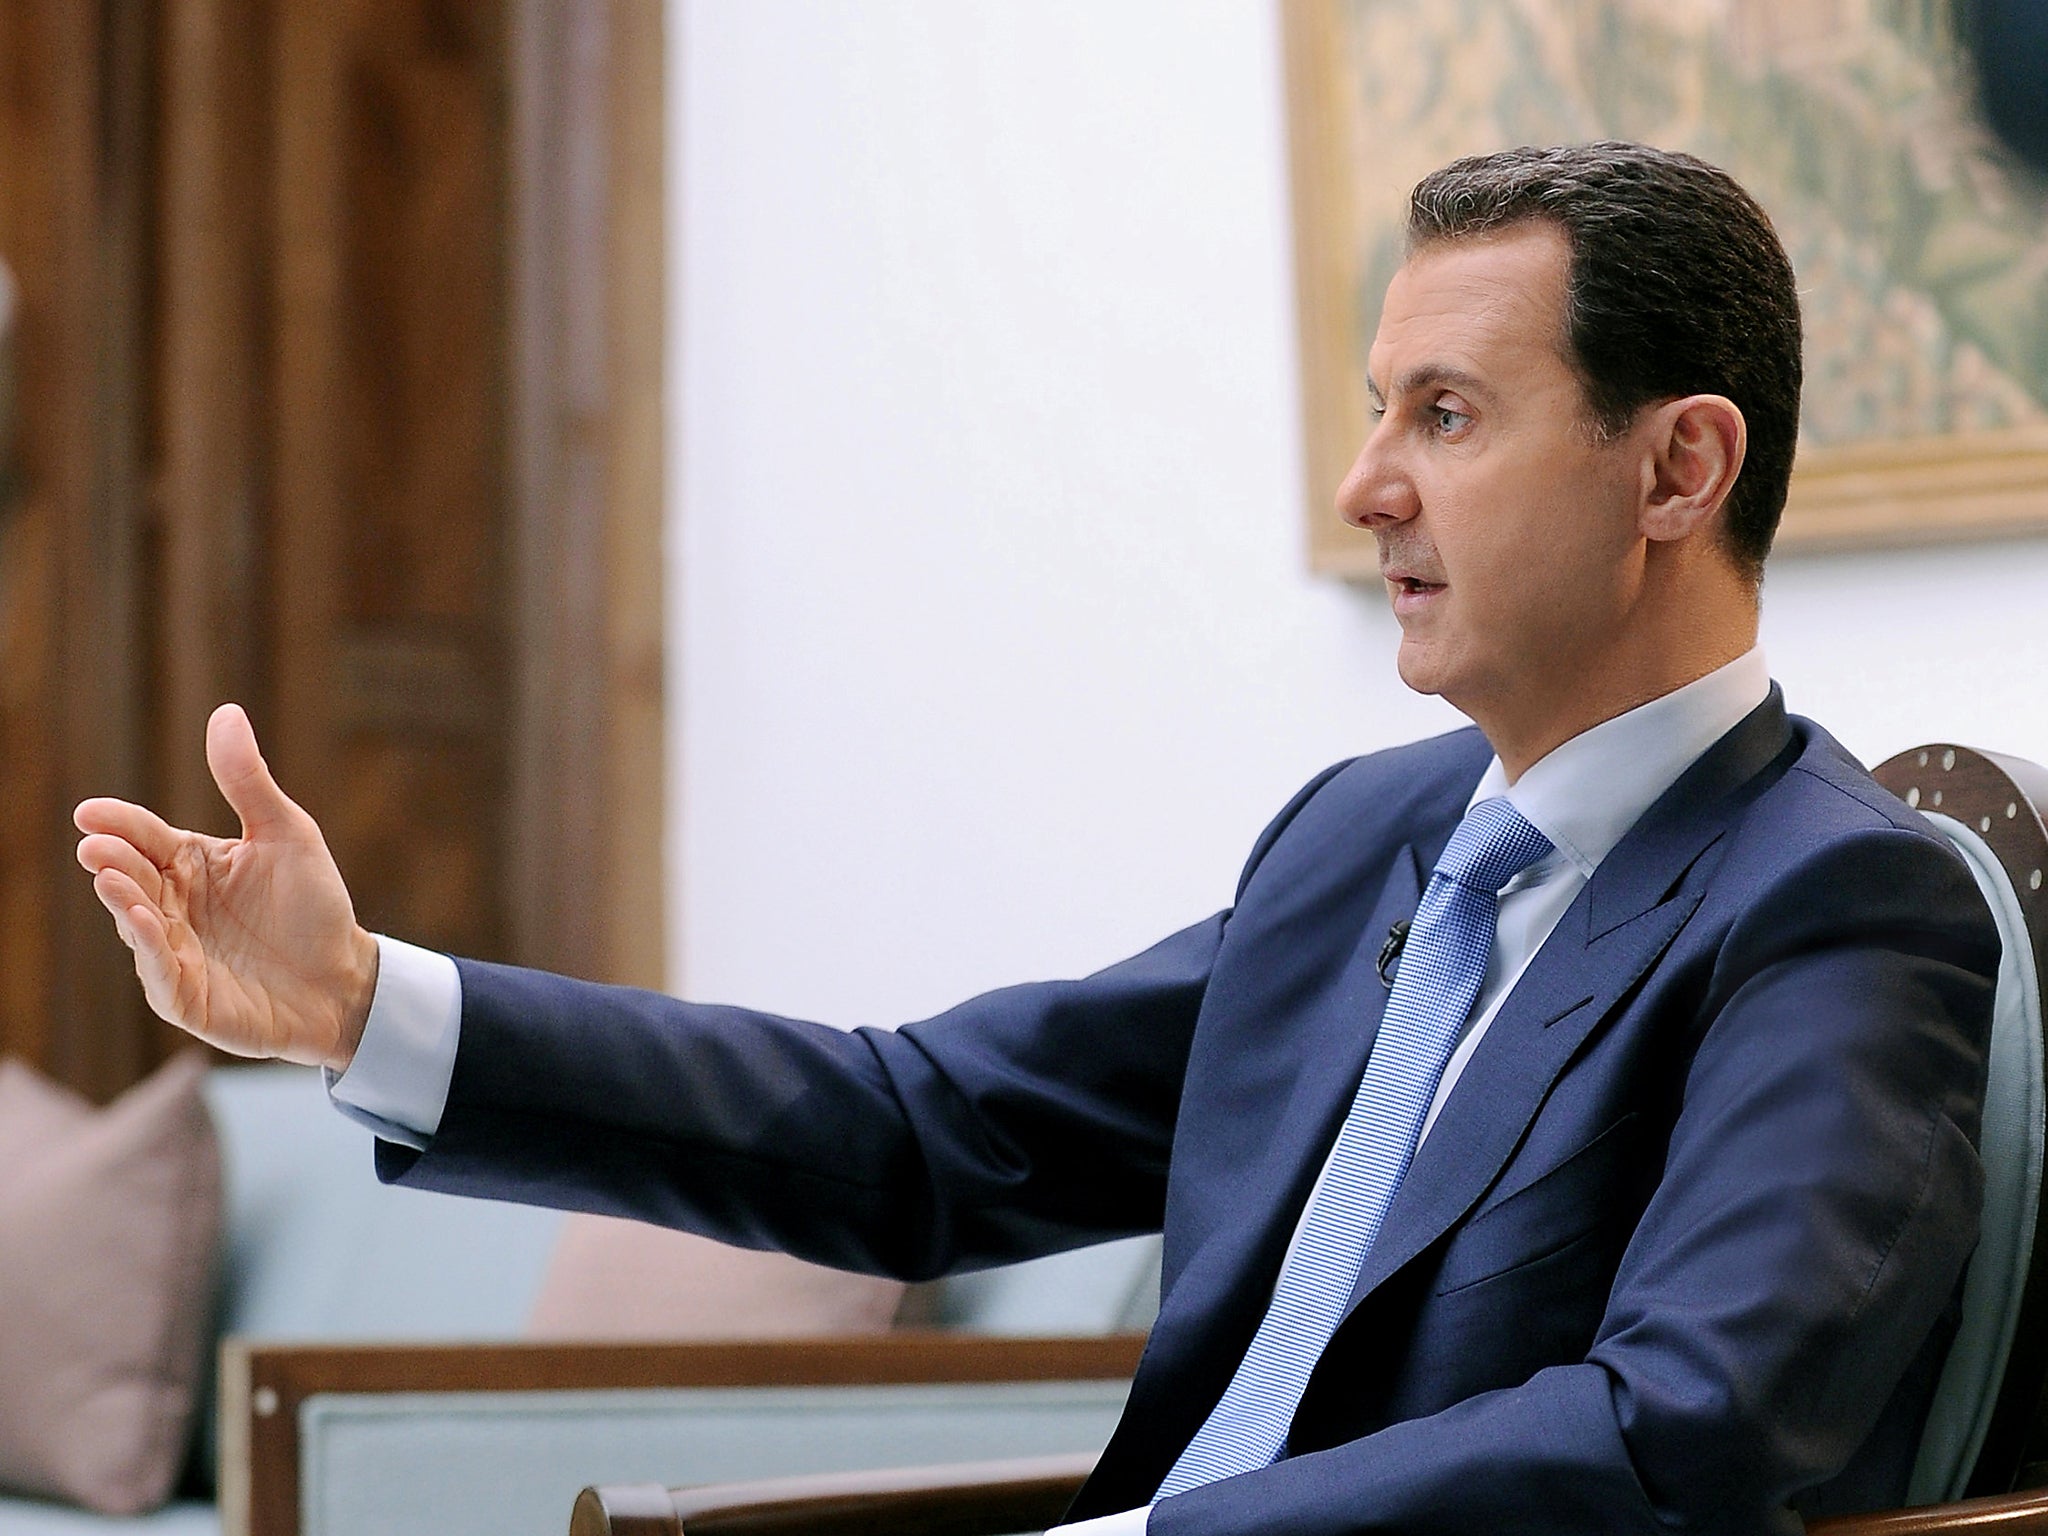 Syria's President Bashar al-Assad: If he loses power, what will happen next?